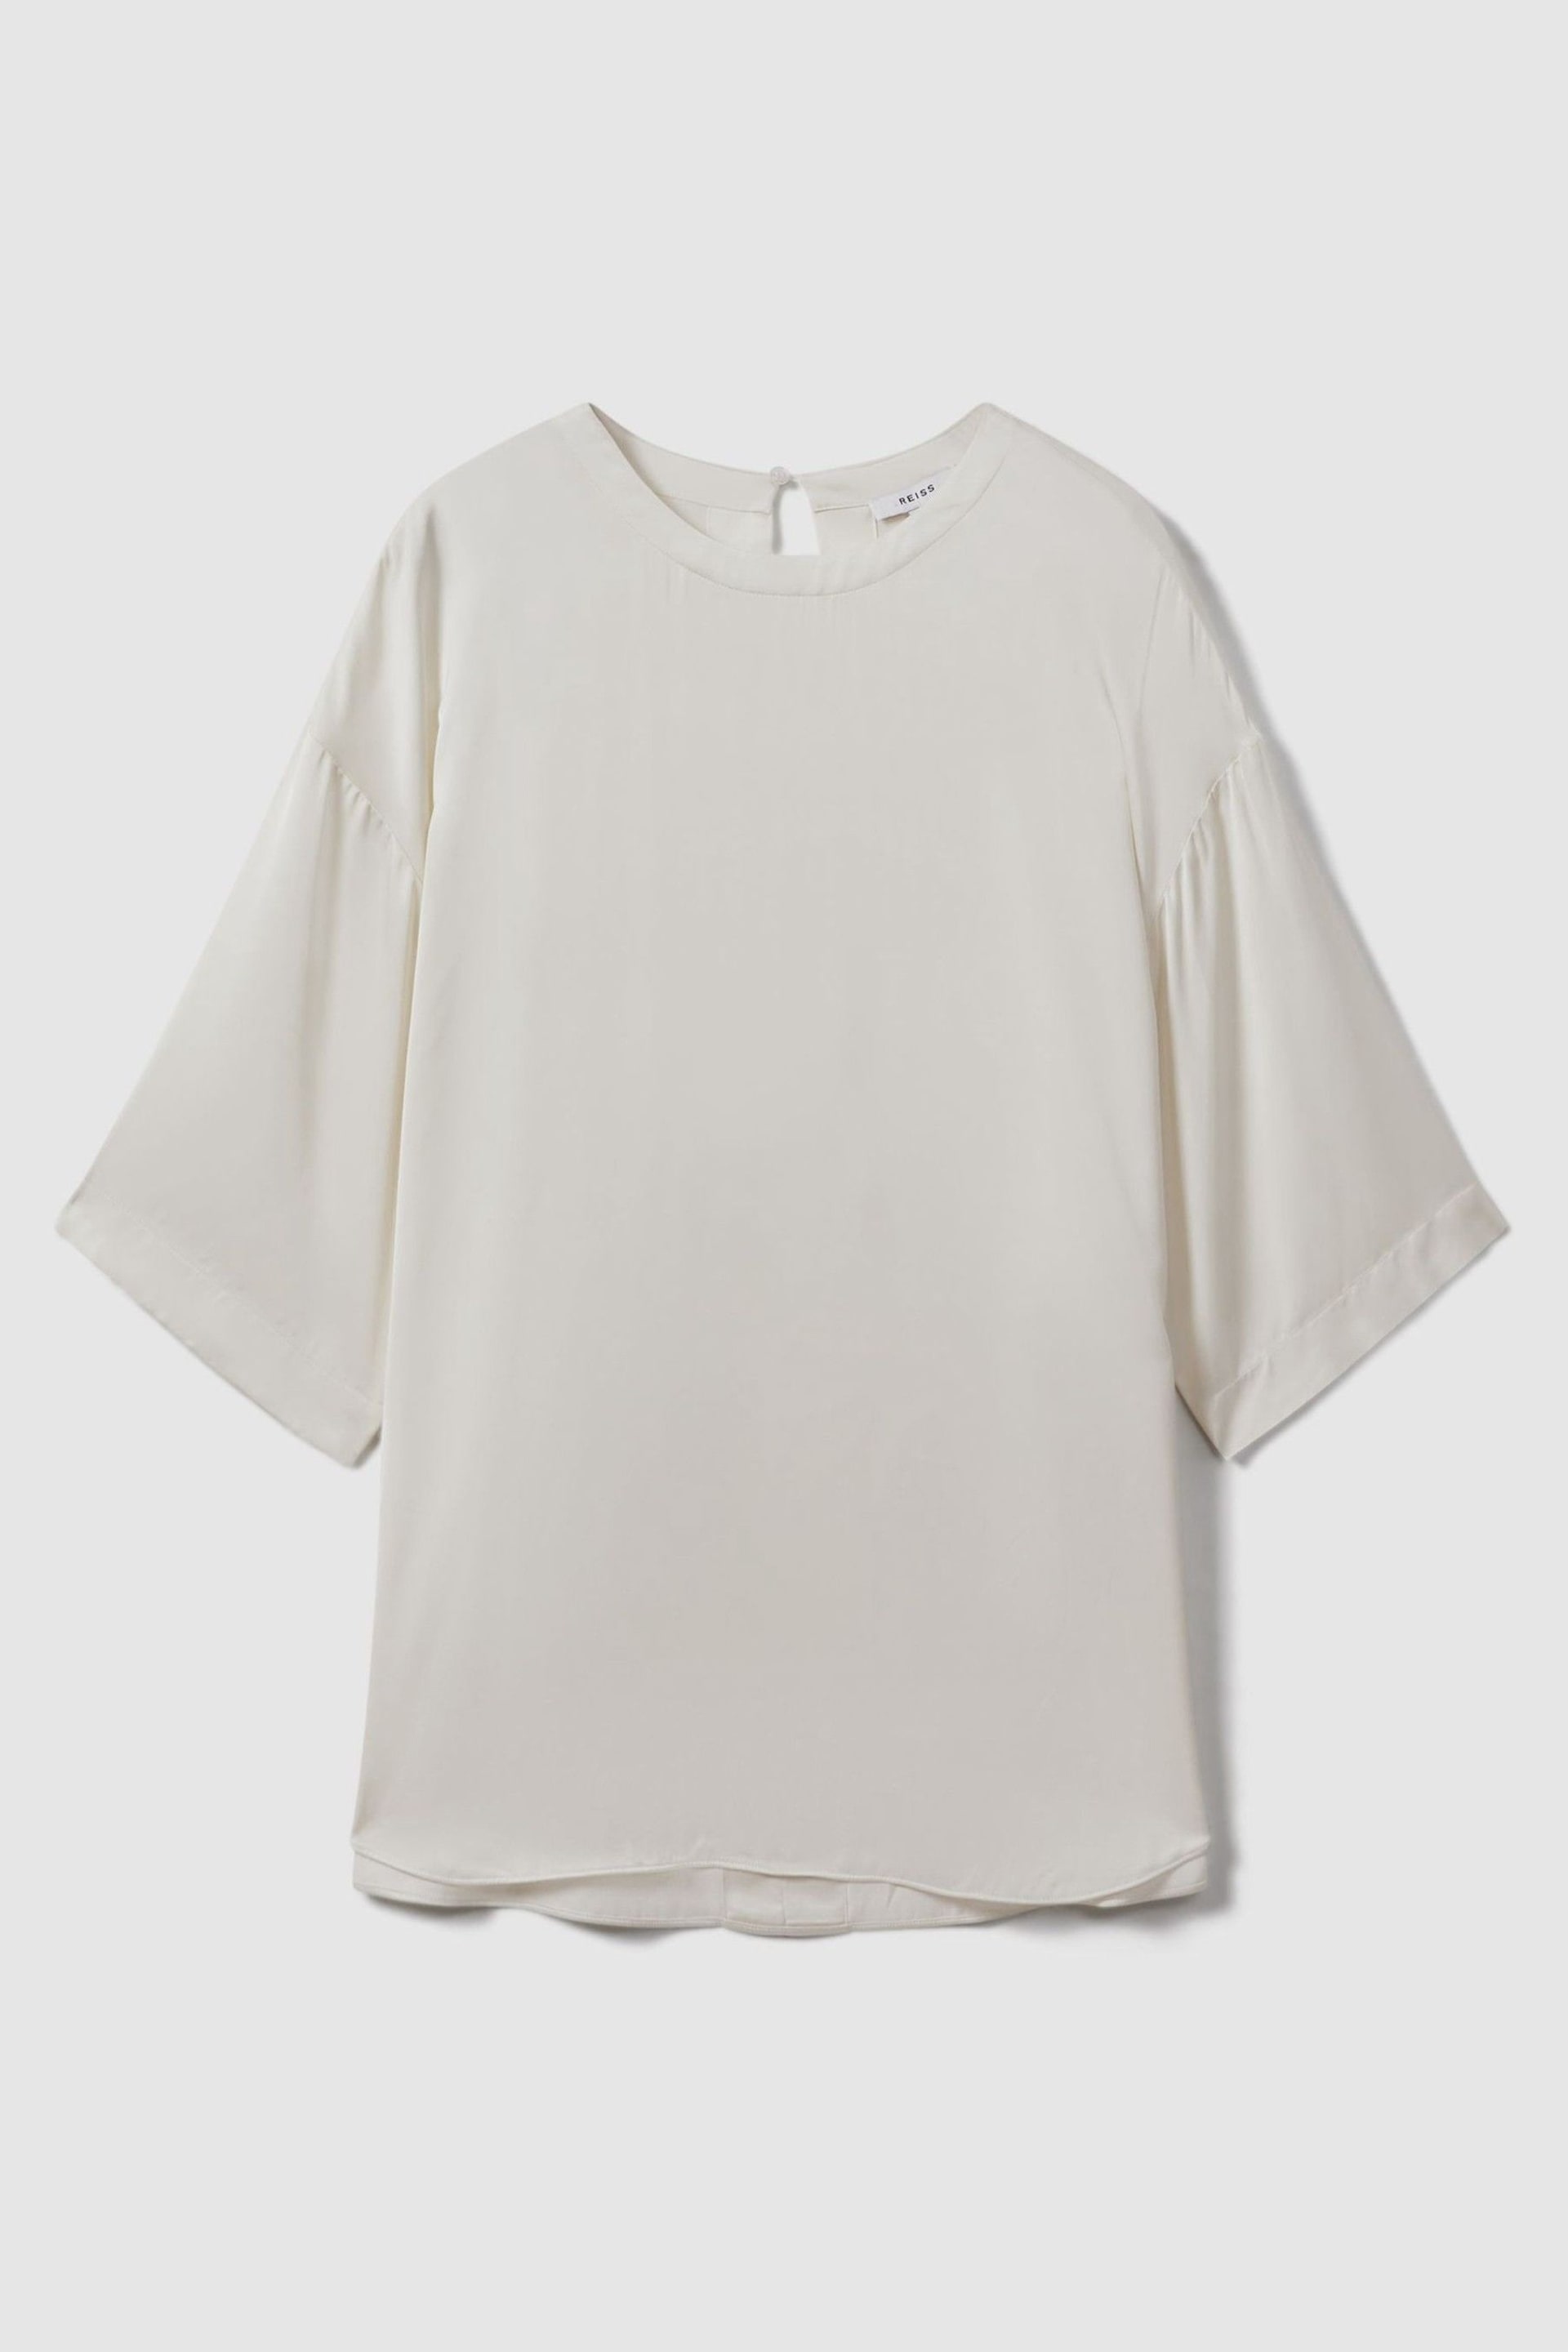 Reiss Ivory Anya Relaxed Satin Blouse - Image 2 of 7